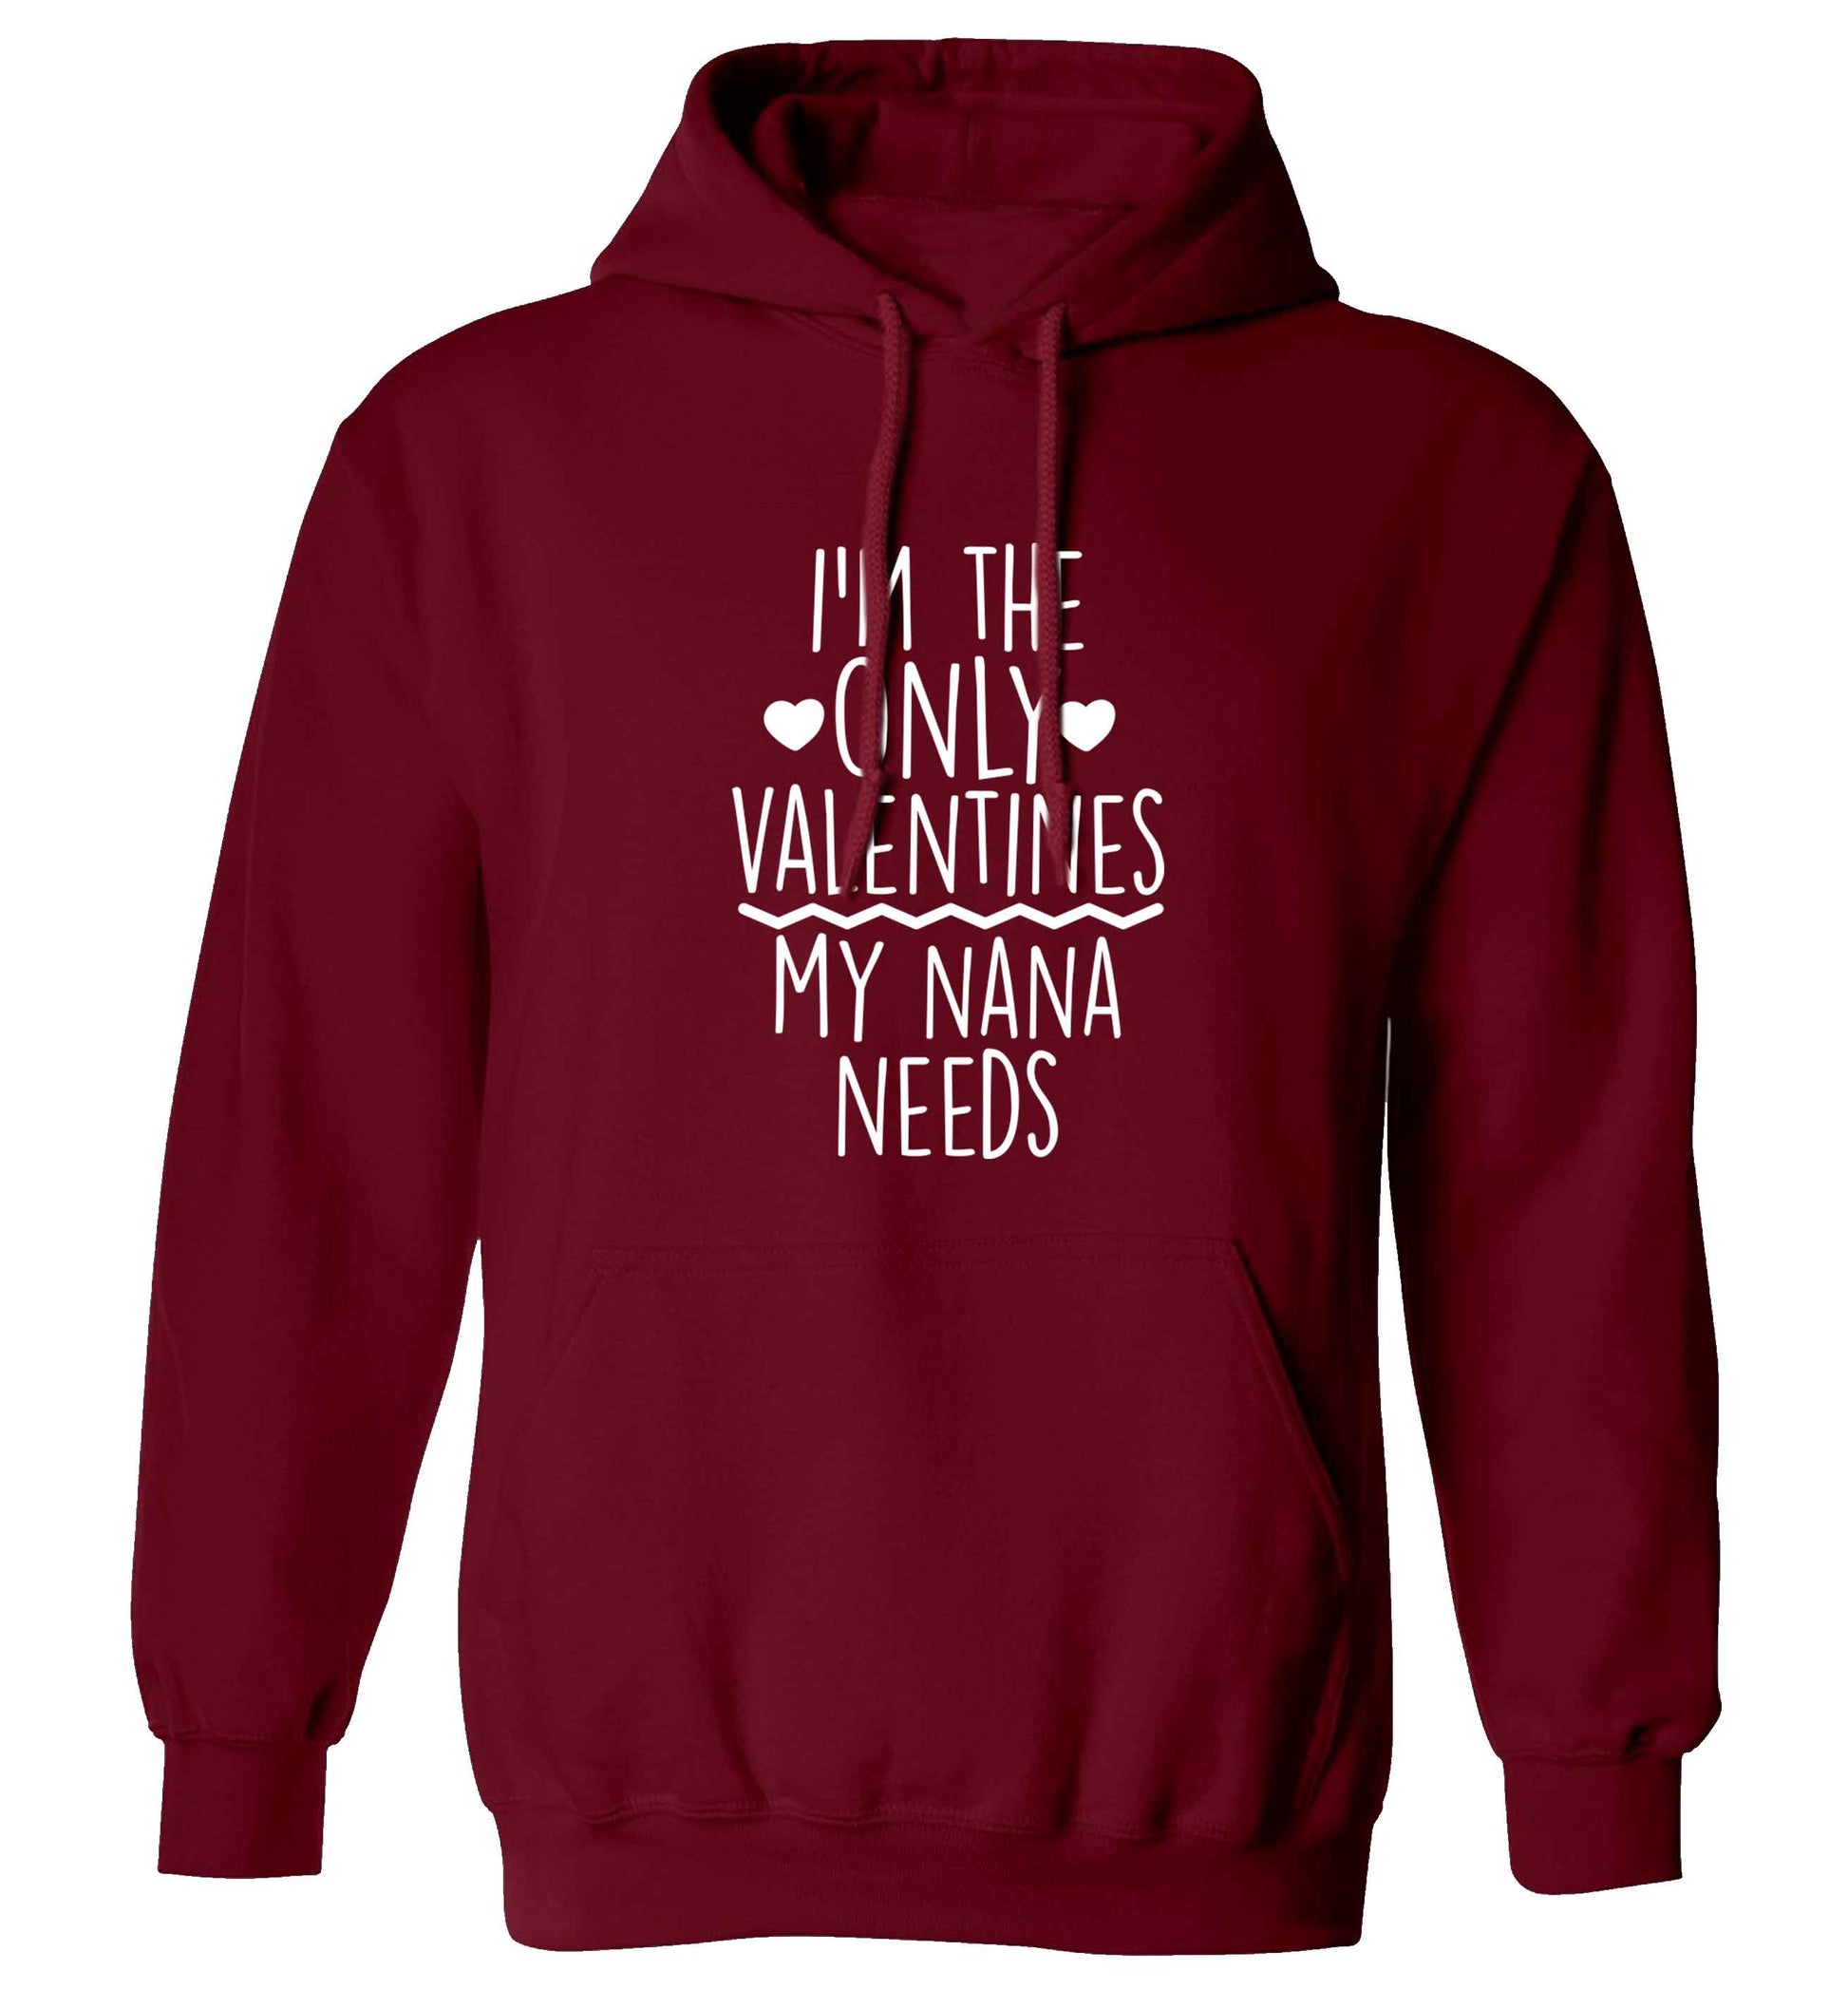 I'm the only valentines my nana needs adults unisex maroon hoodie 2XL